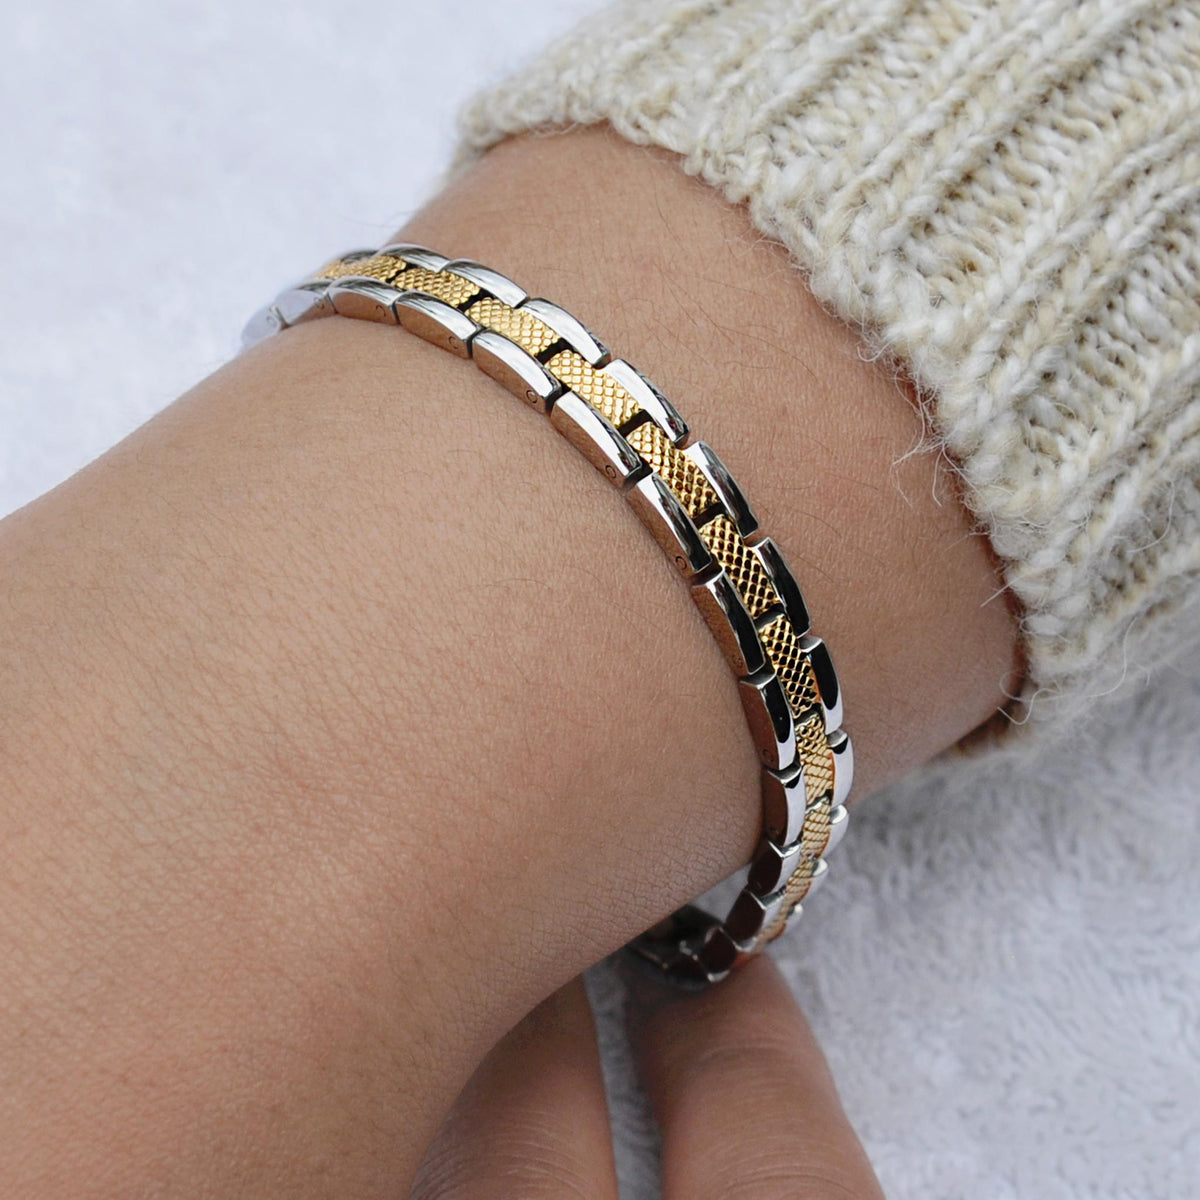 Magnetic bracelet with gold and silver details for ladies